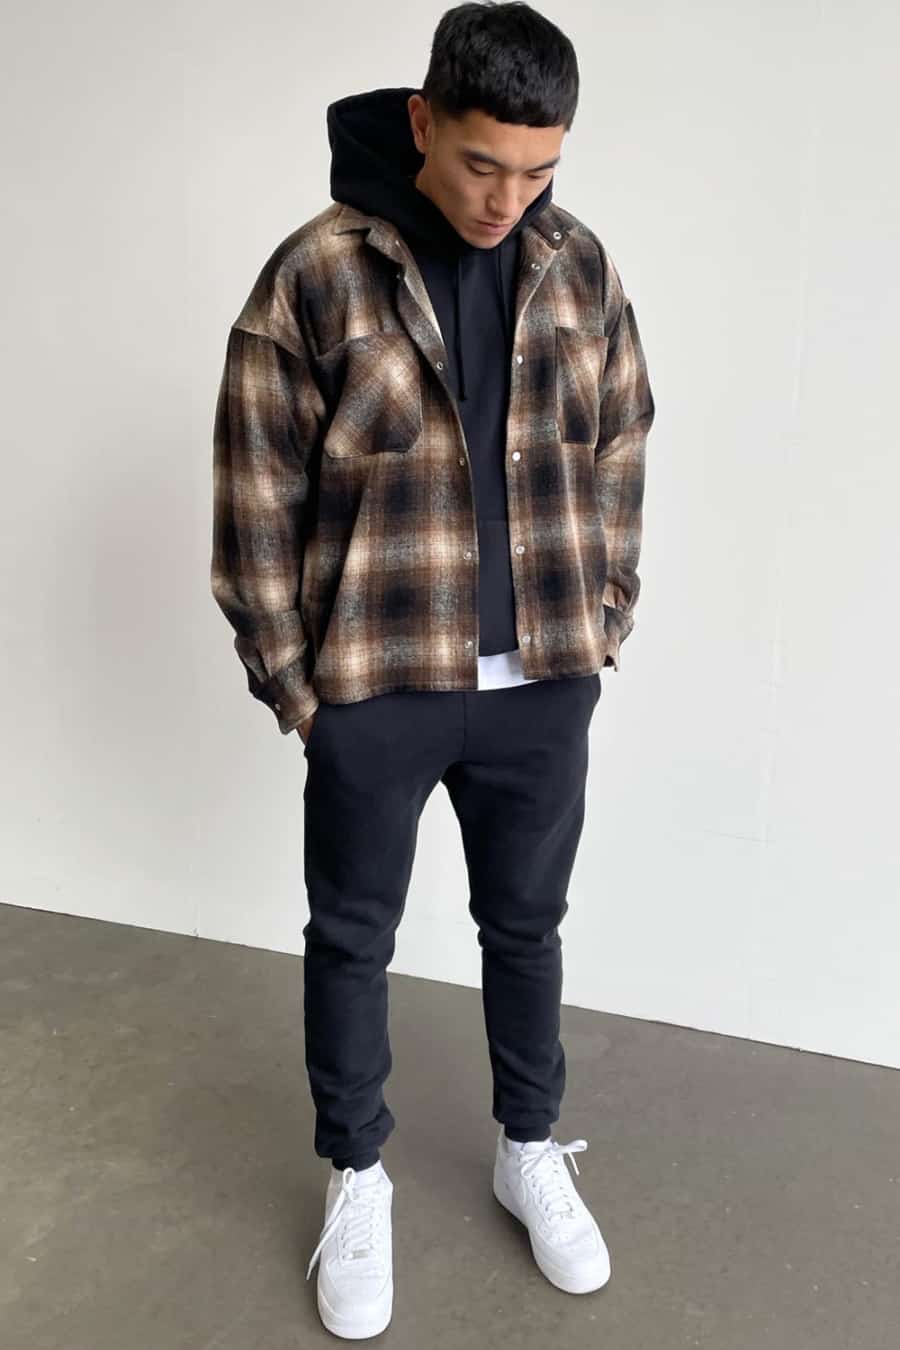 Flannel Over 11 Ways To Nail The Look 2023